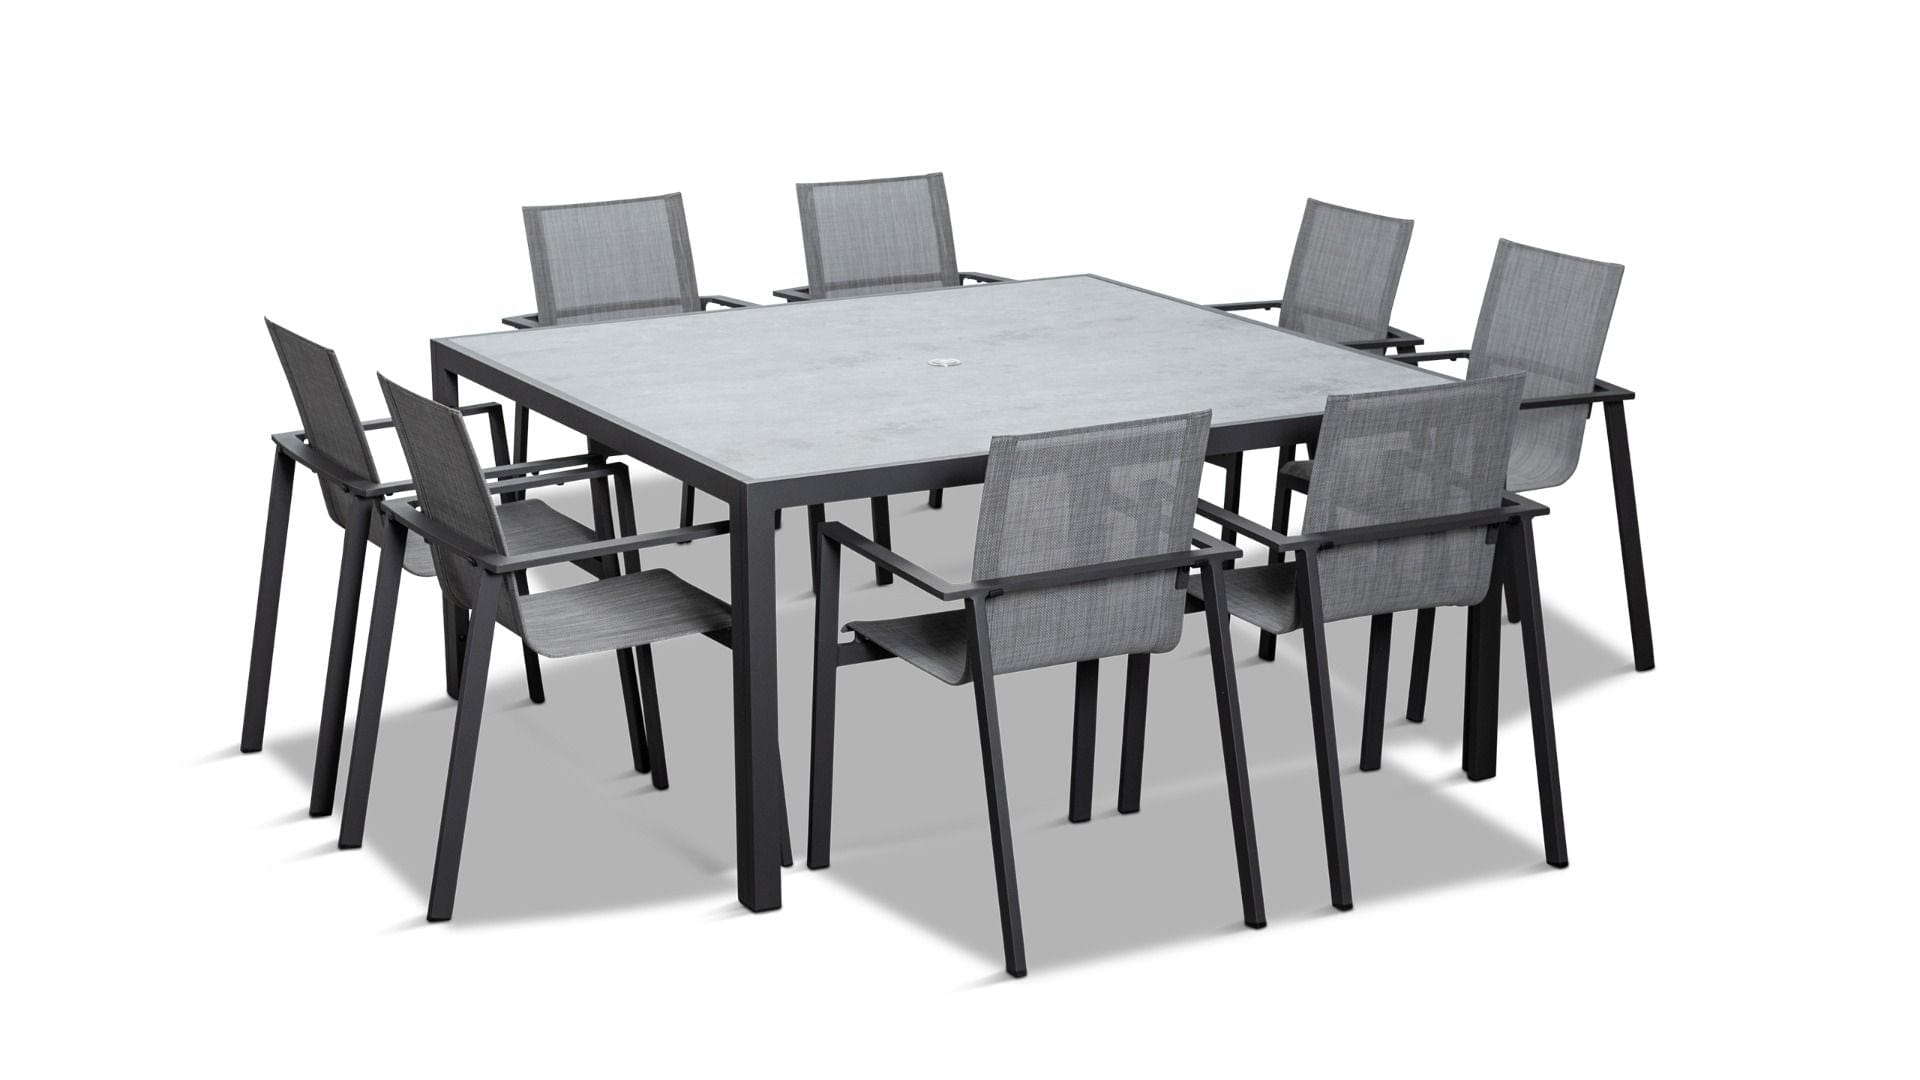 Harmonia Living Outdoor Dining Set Slate Harmonia Living - Lift 9 Piece Square Dining Set - Black/Black | 8 Lift Dining Arm Chairs - Black | 1 Staple 8-Seater Square Dining Table - Black | HL-LIFT-BK-9SDS